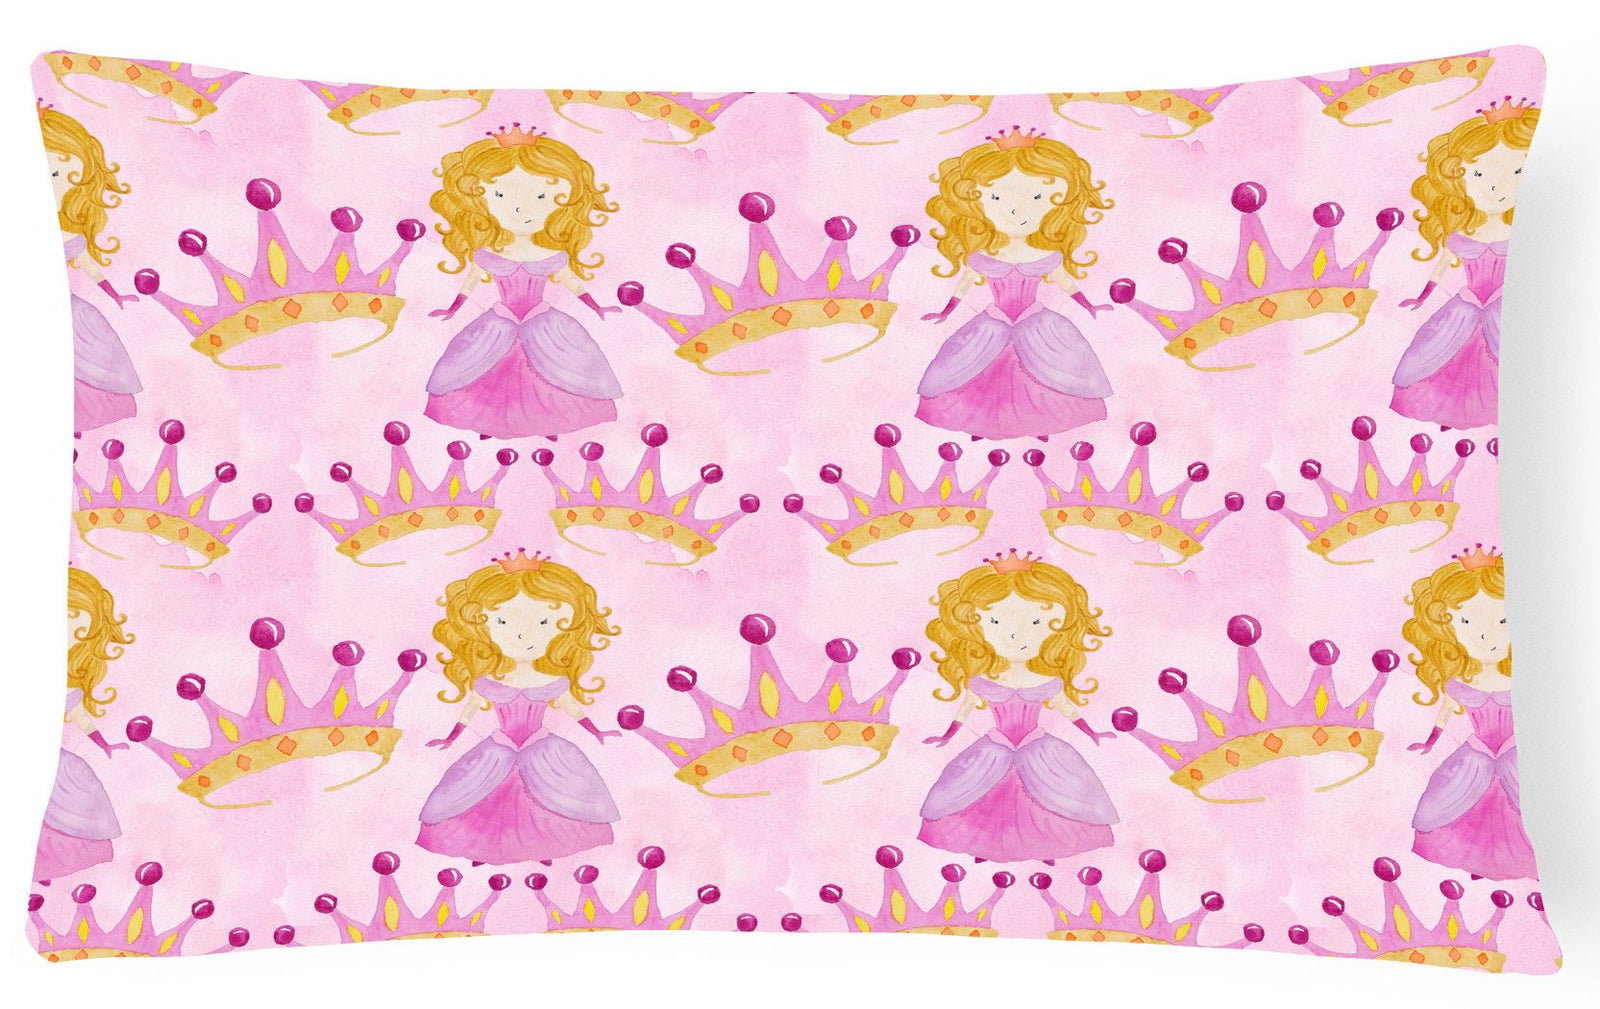 Watercolor Princess and Crown Canvas Fabric Decorative Pillow BB7551PW1216 by Caroline's Treasures